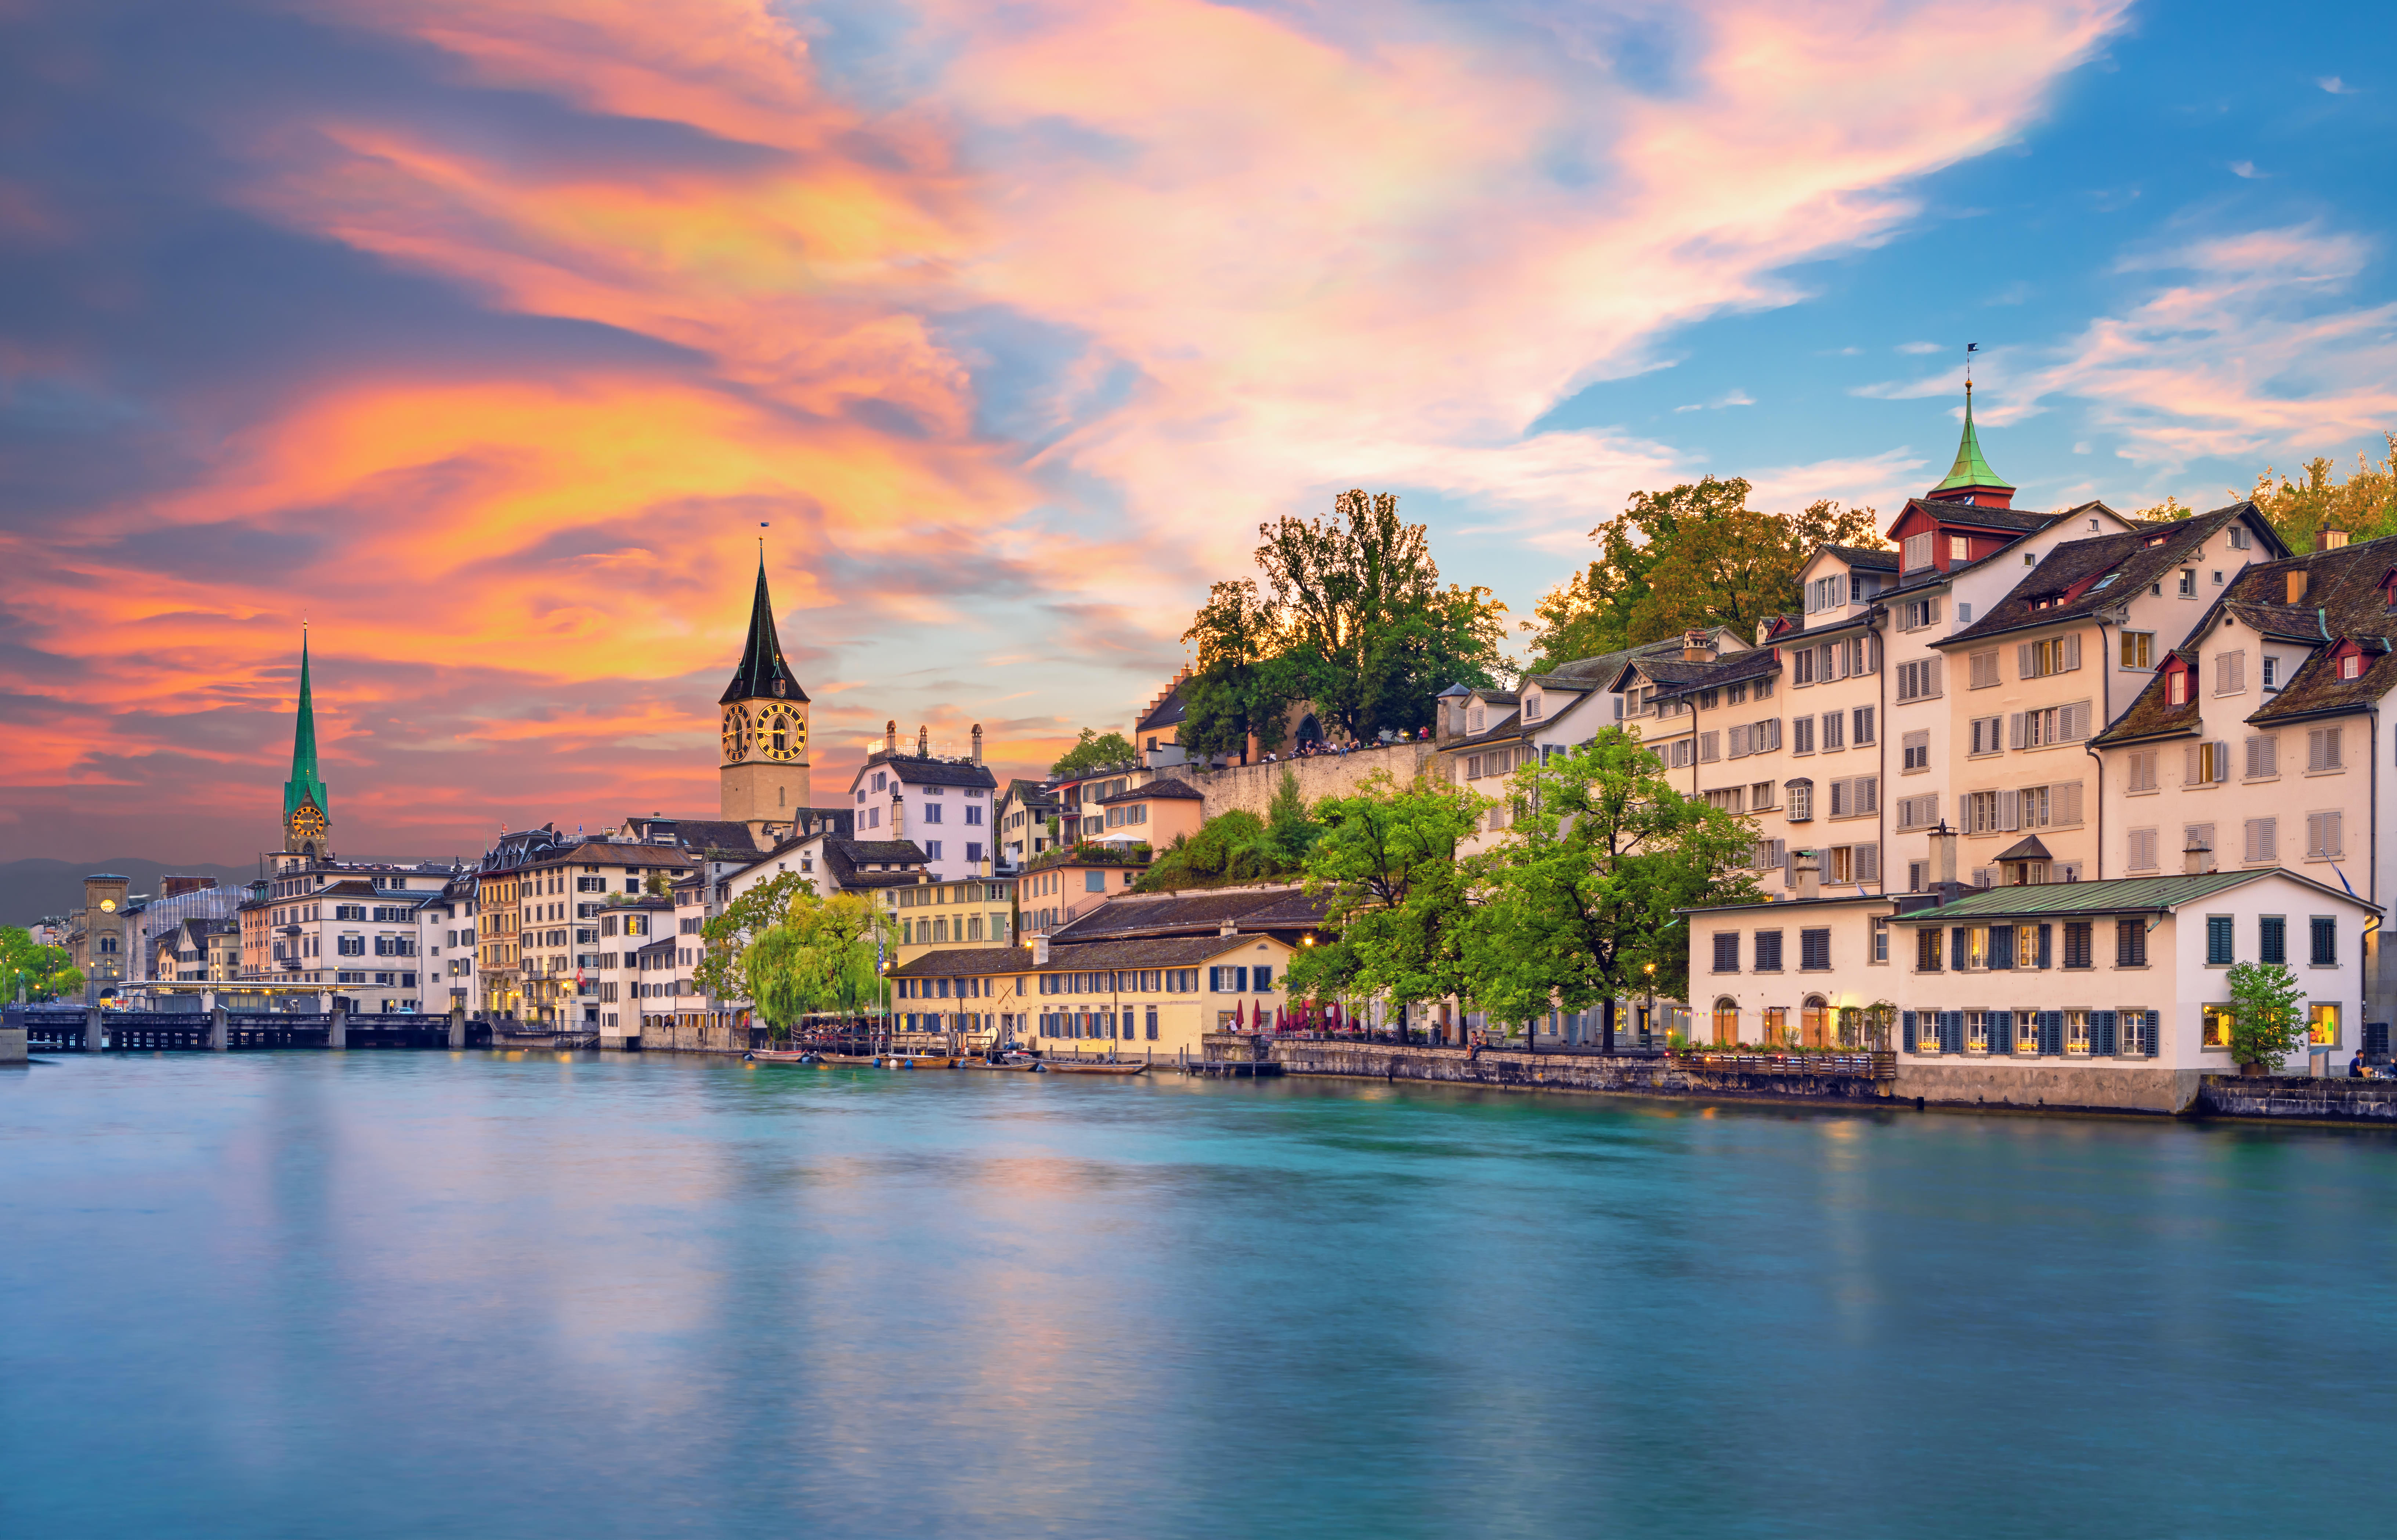 Things to Do in Zurich